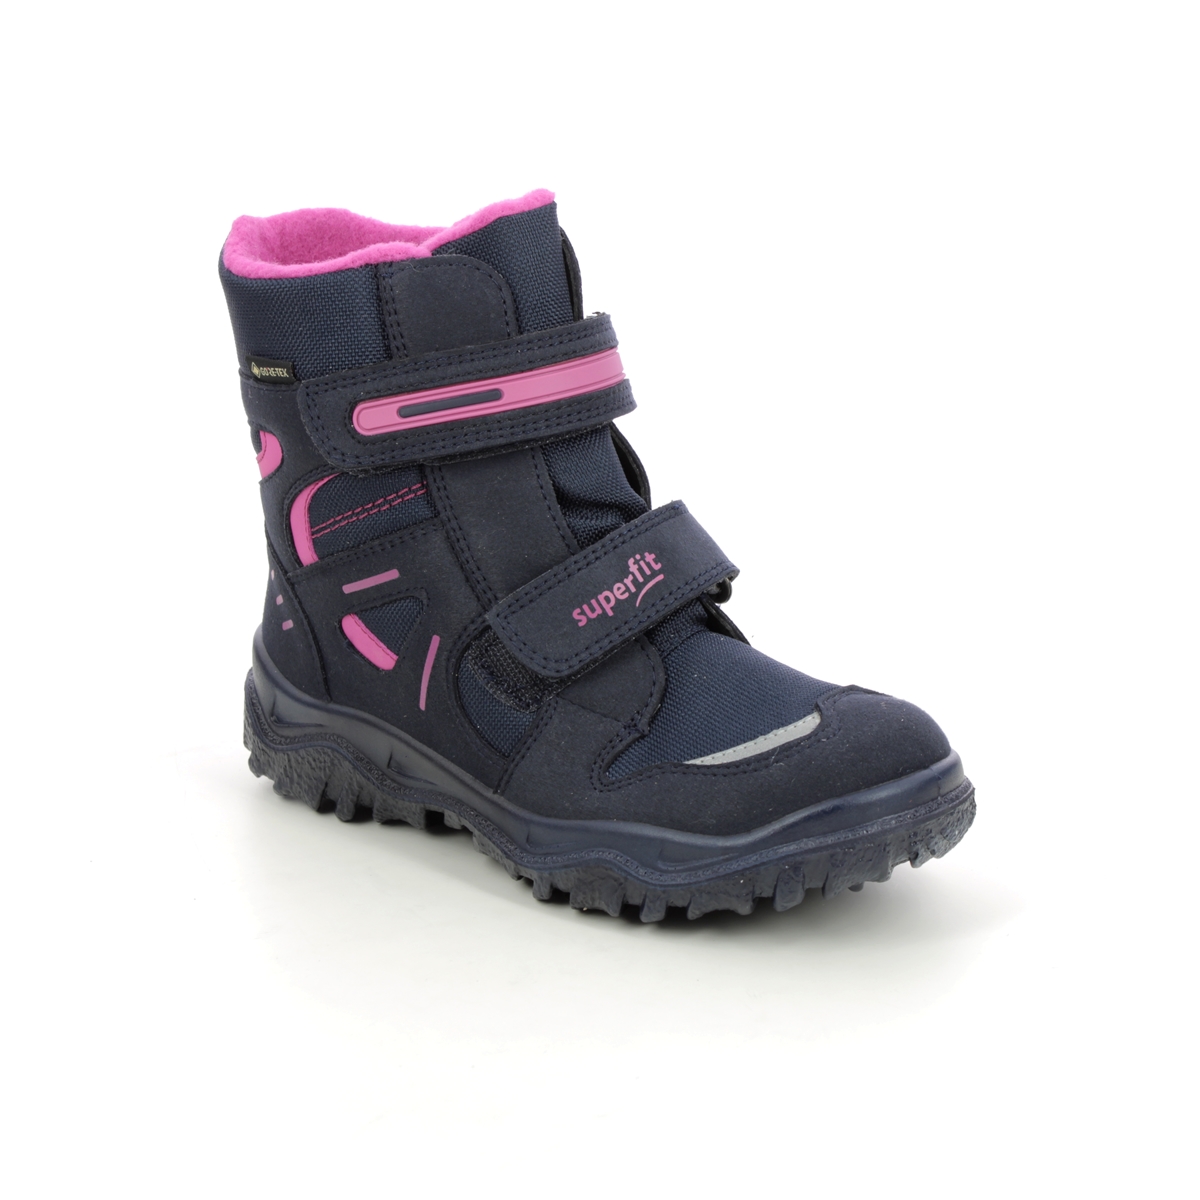 Superfit Husky Jnr Gore Navy Pink Kids Girls Boots 1809080-8020 In Size 30 In Plain Navy Pink For kids